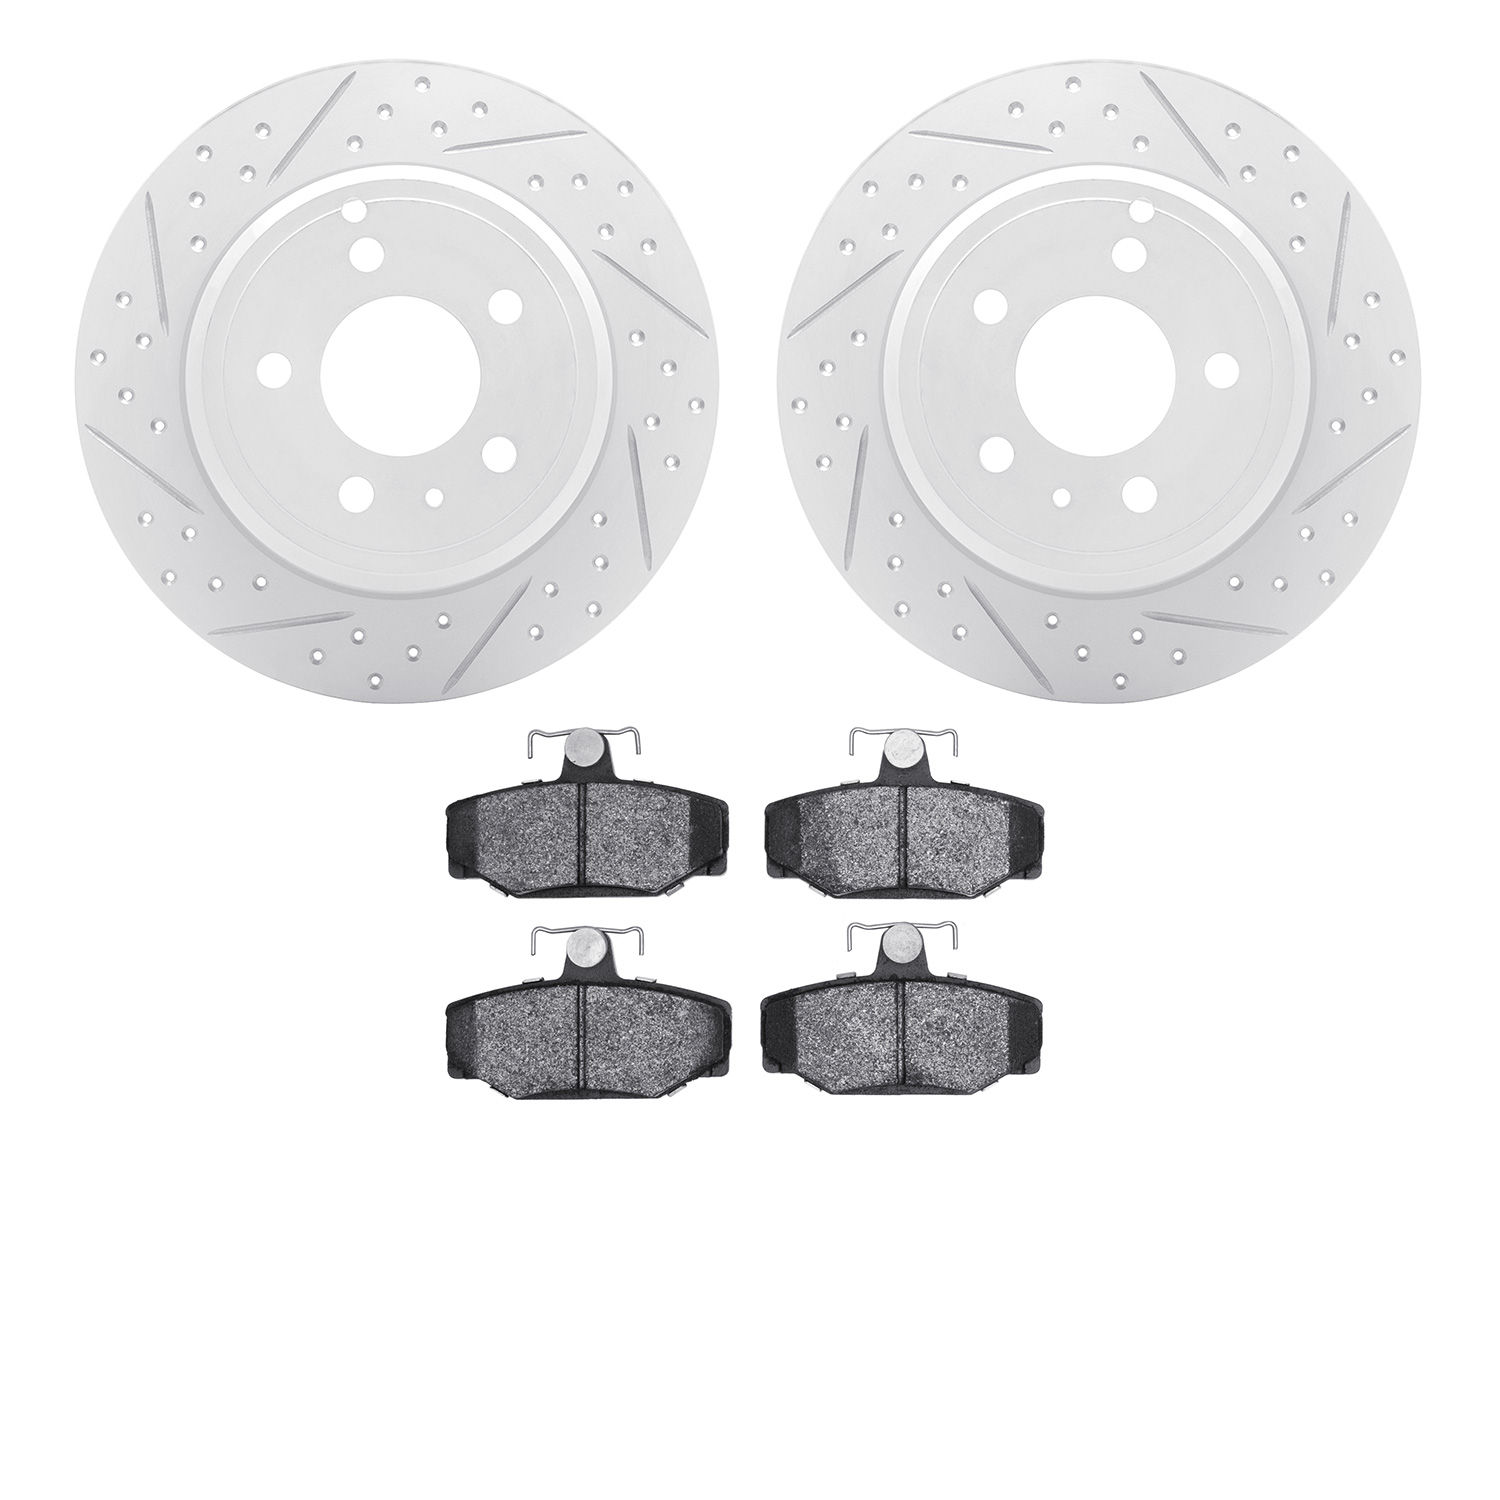 2602-27018 Geoperformance Drilled/Slotted Rotors w/5000 Euro Ceramic Brake Pads Kit, 1996-1997 Volvo, Position: Rear